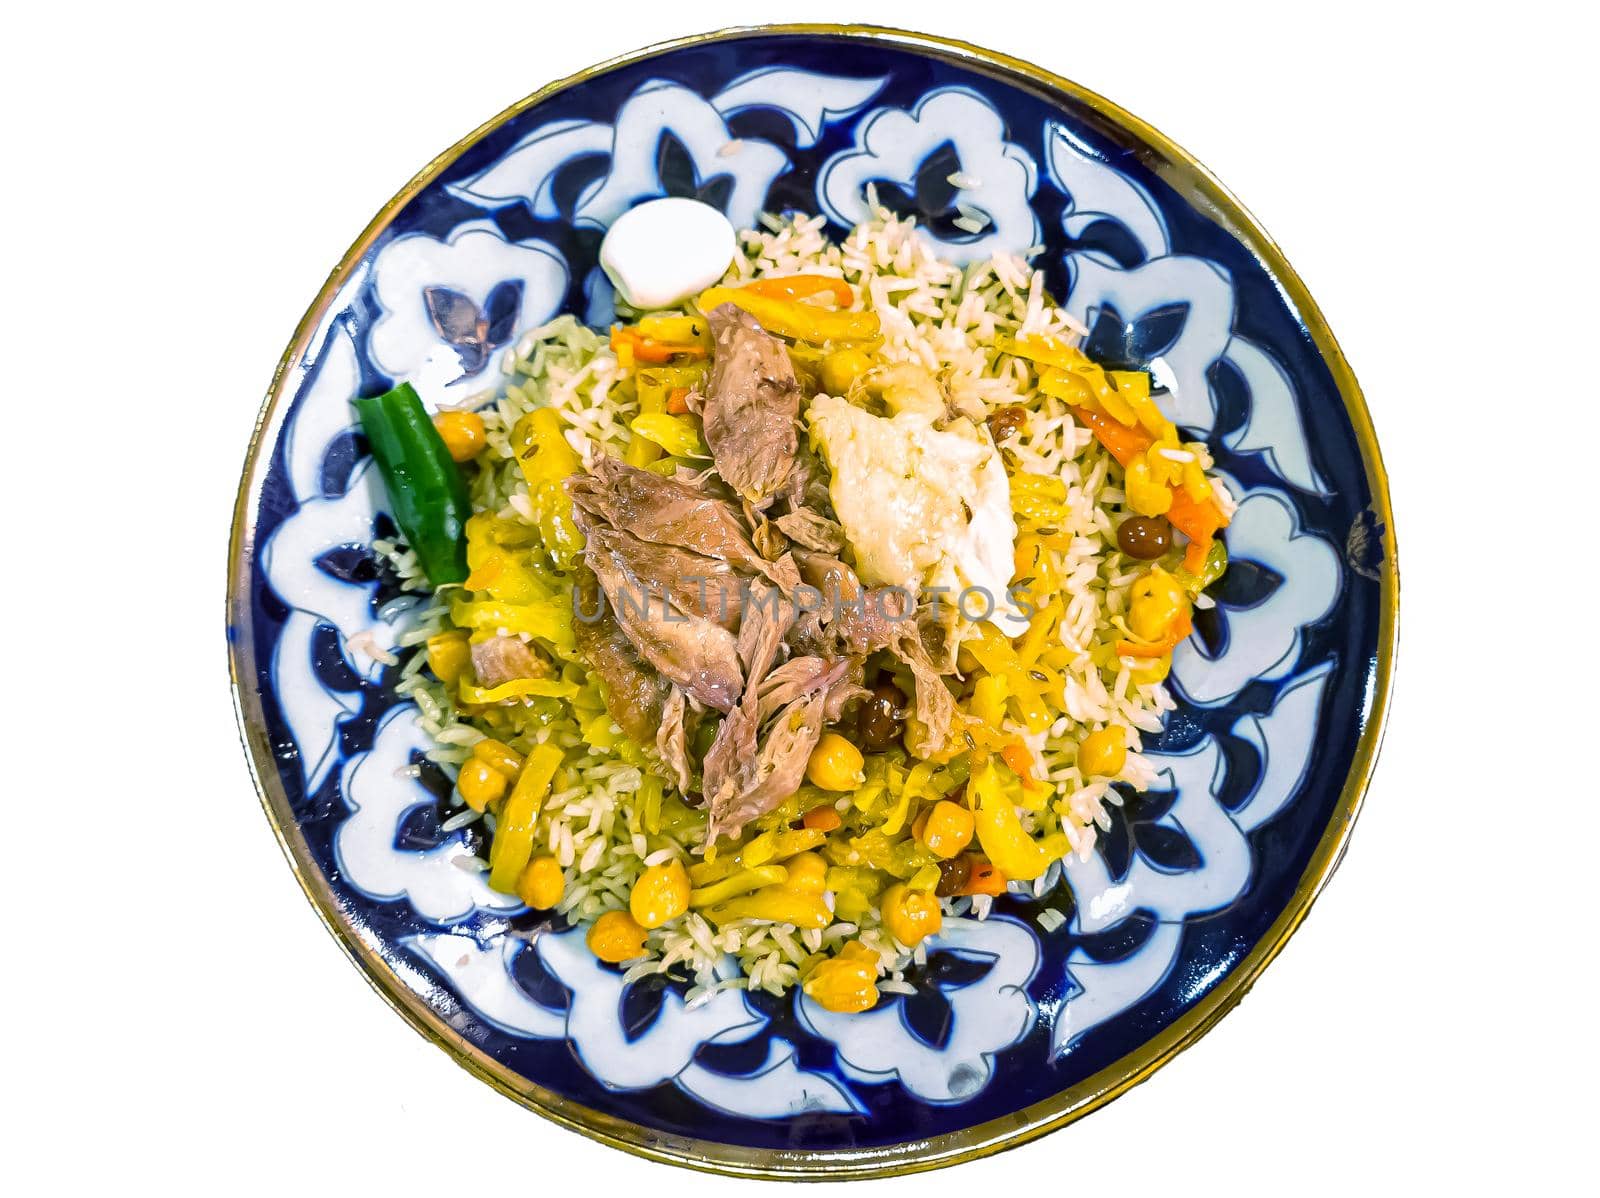 Traditional Uzbek pilaf from Samarkand. Meat, vegetables and rice are not mixed and laid out in layers